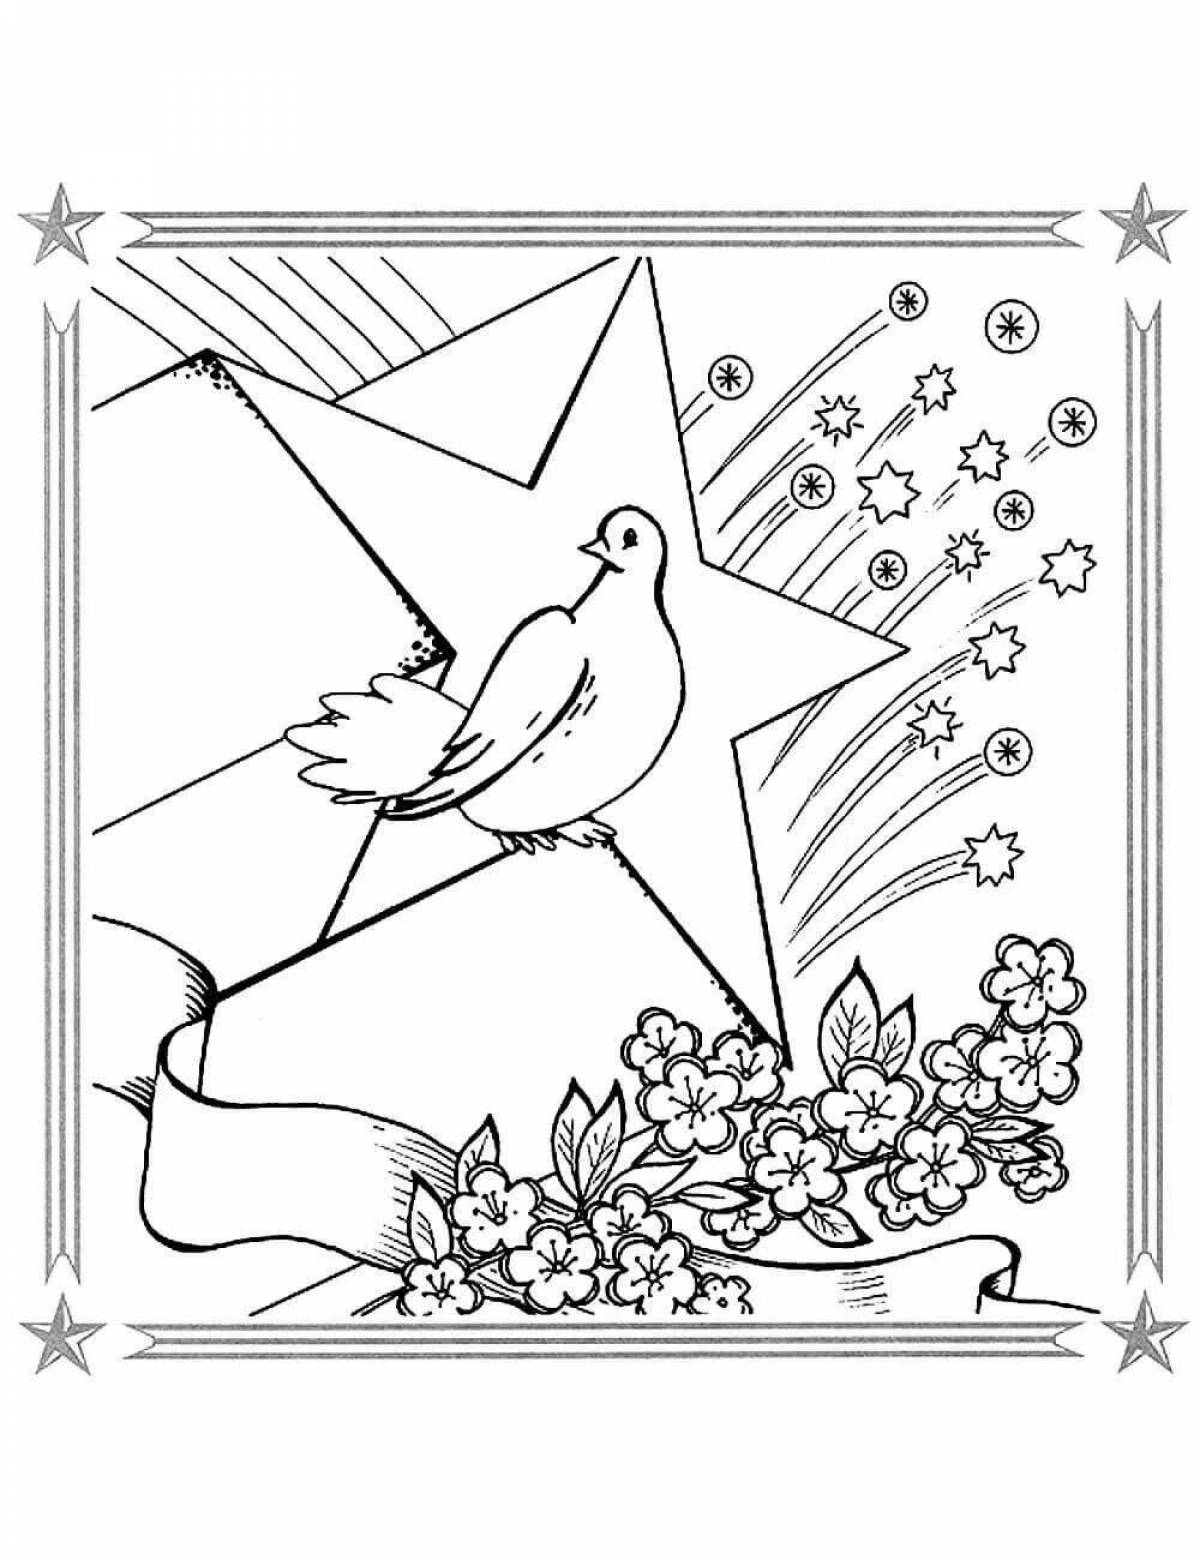 Royal soldier with dove coloring page